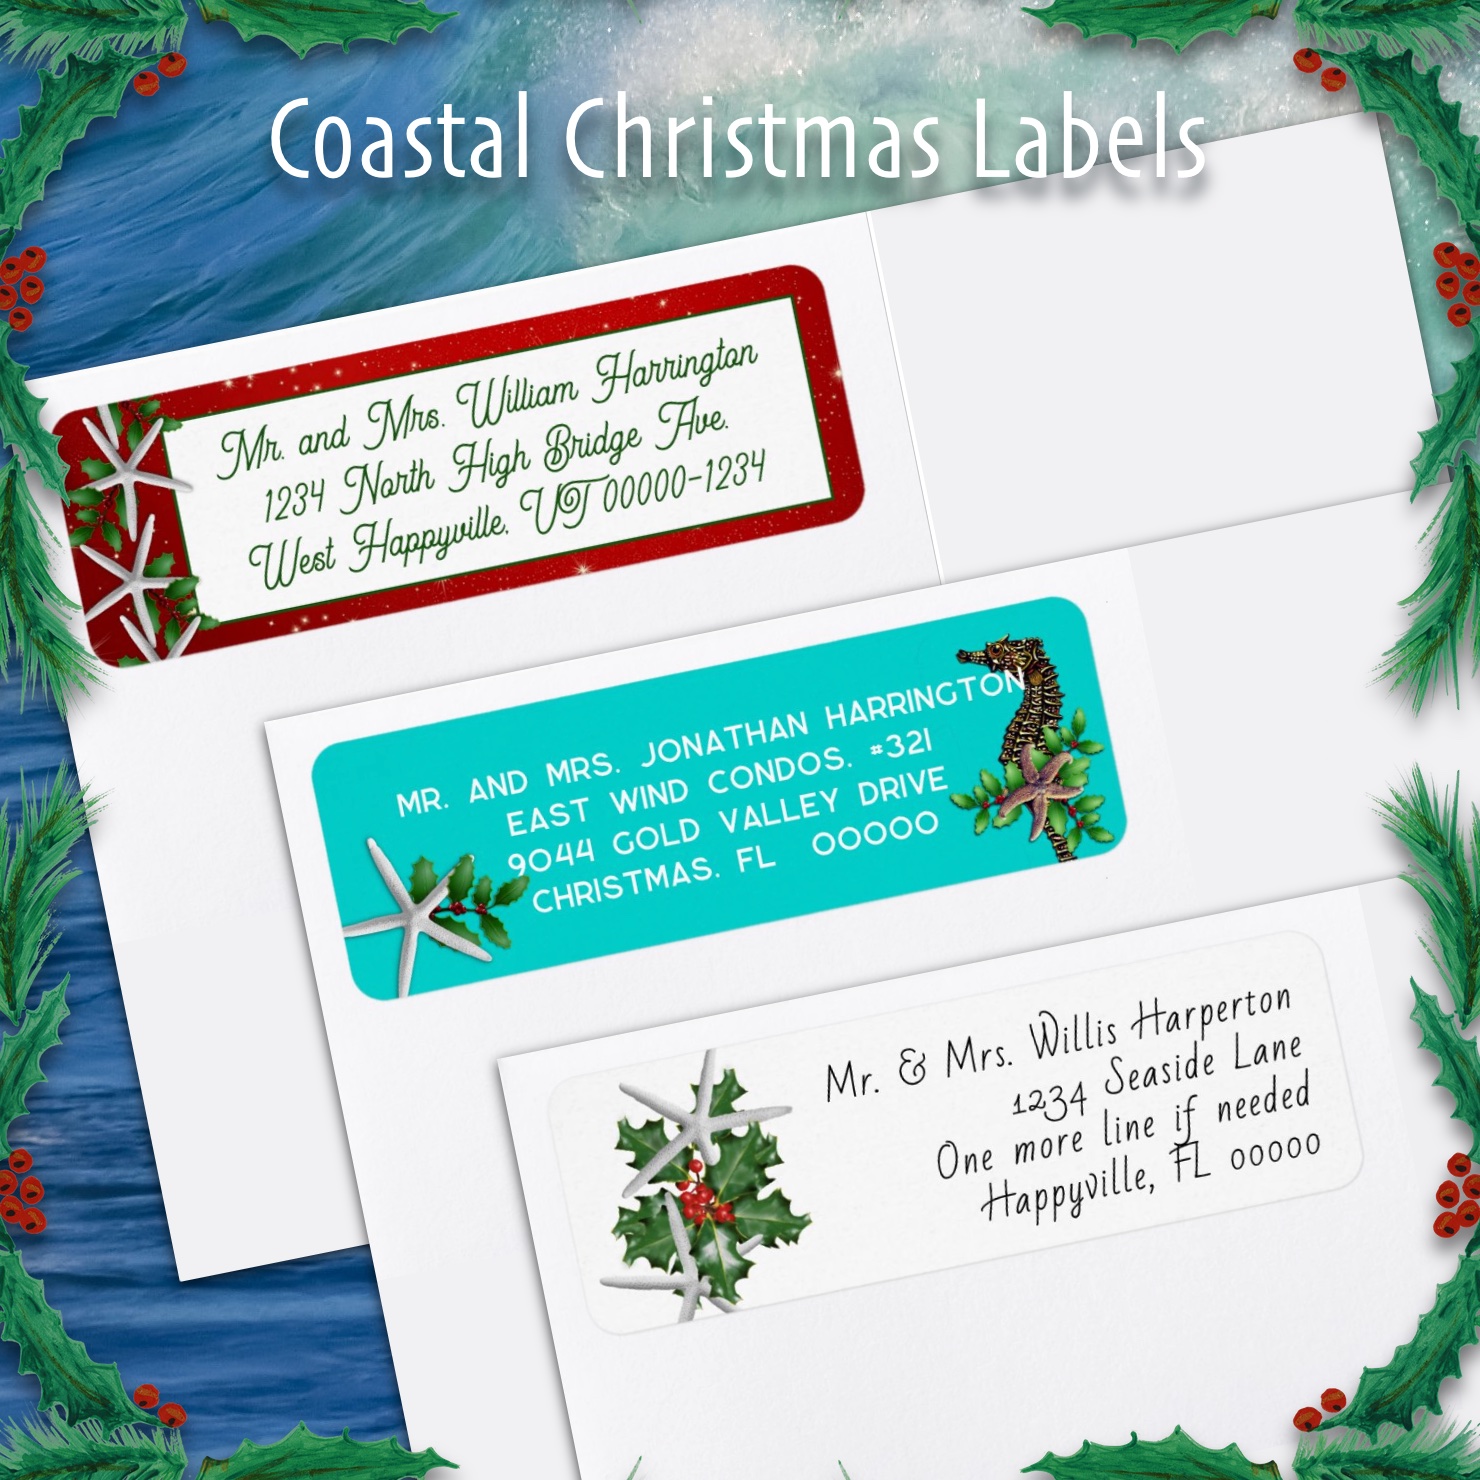 Coastal Christmas return address labels with starfish, sea horses, sand dollars and more.